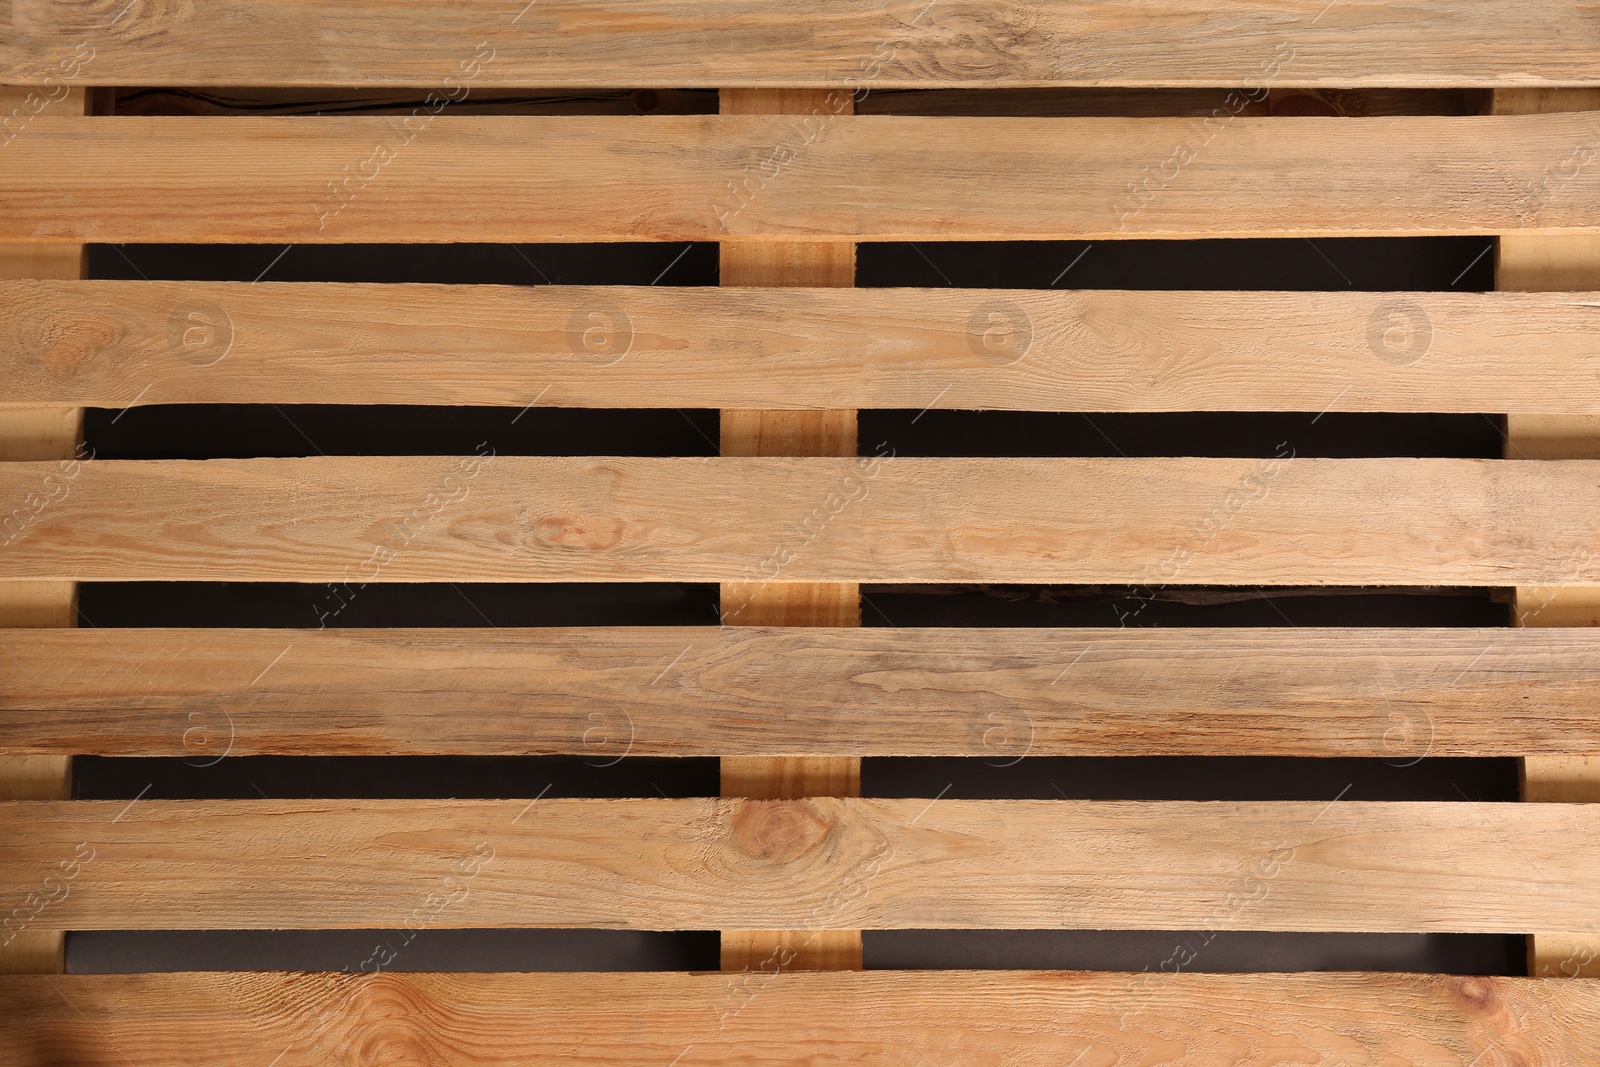 Photo of Wooden pallet as background, top view. Transportation and storage